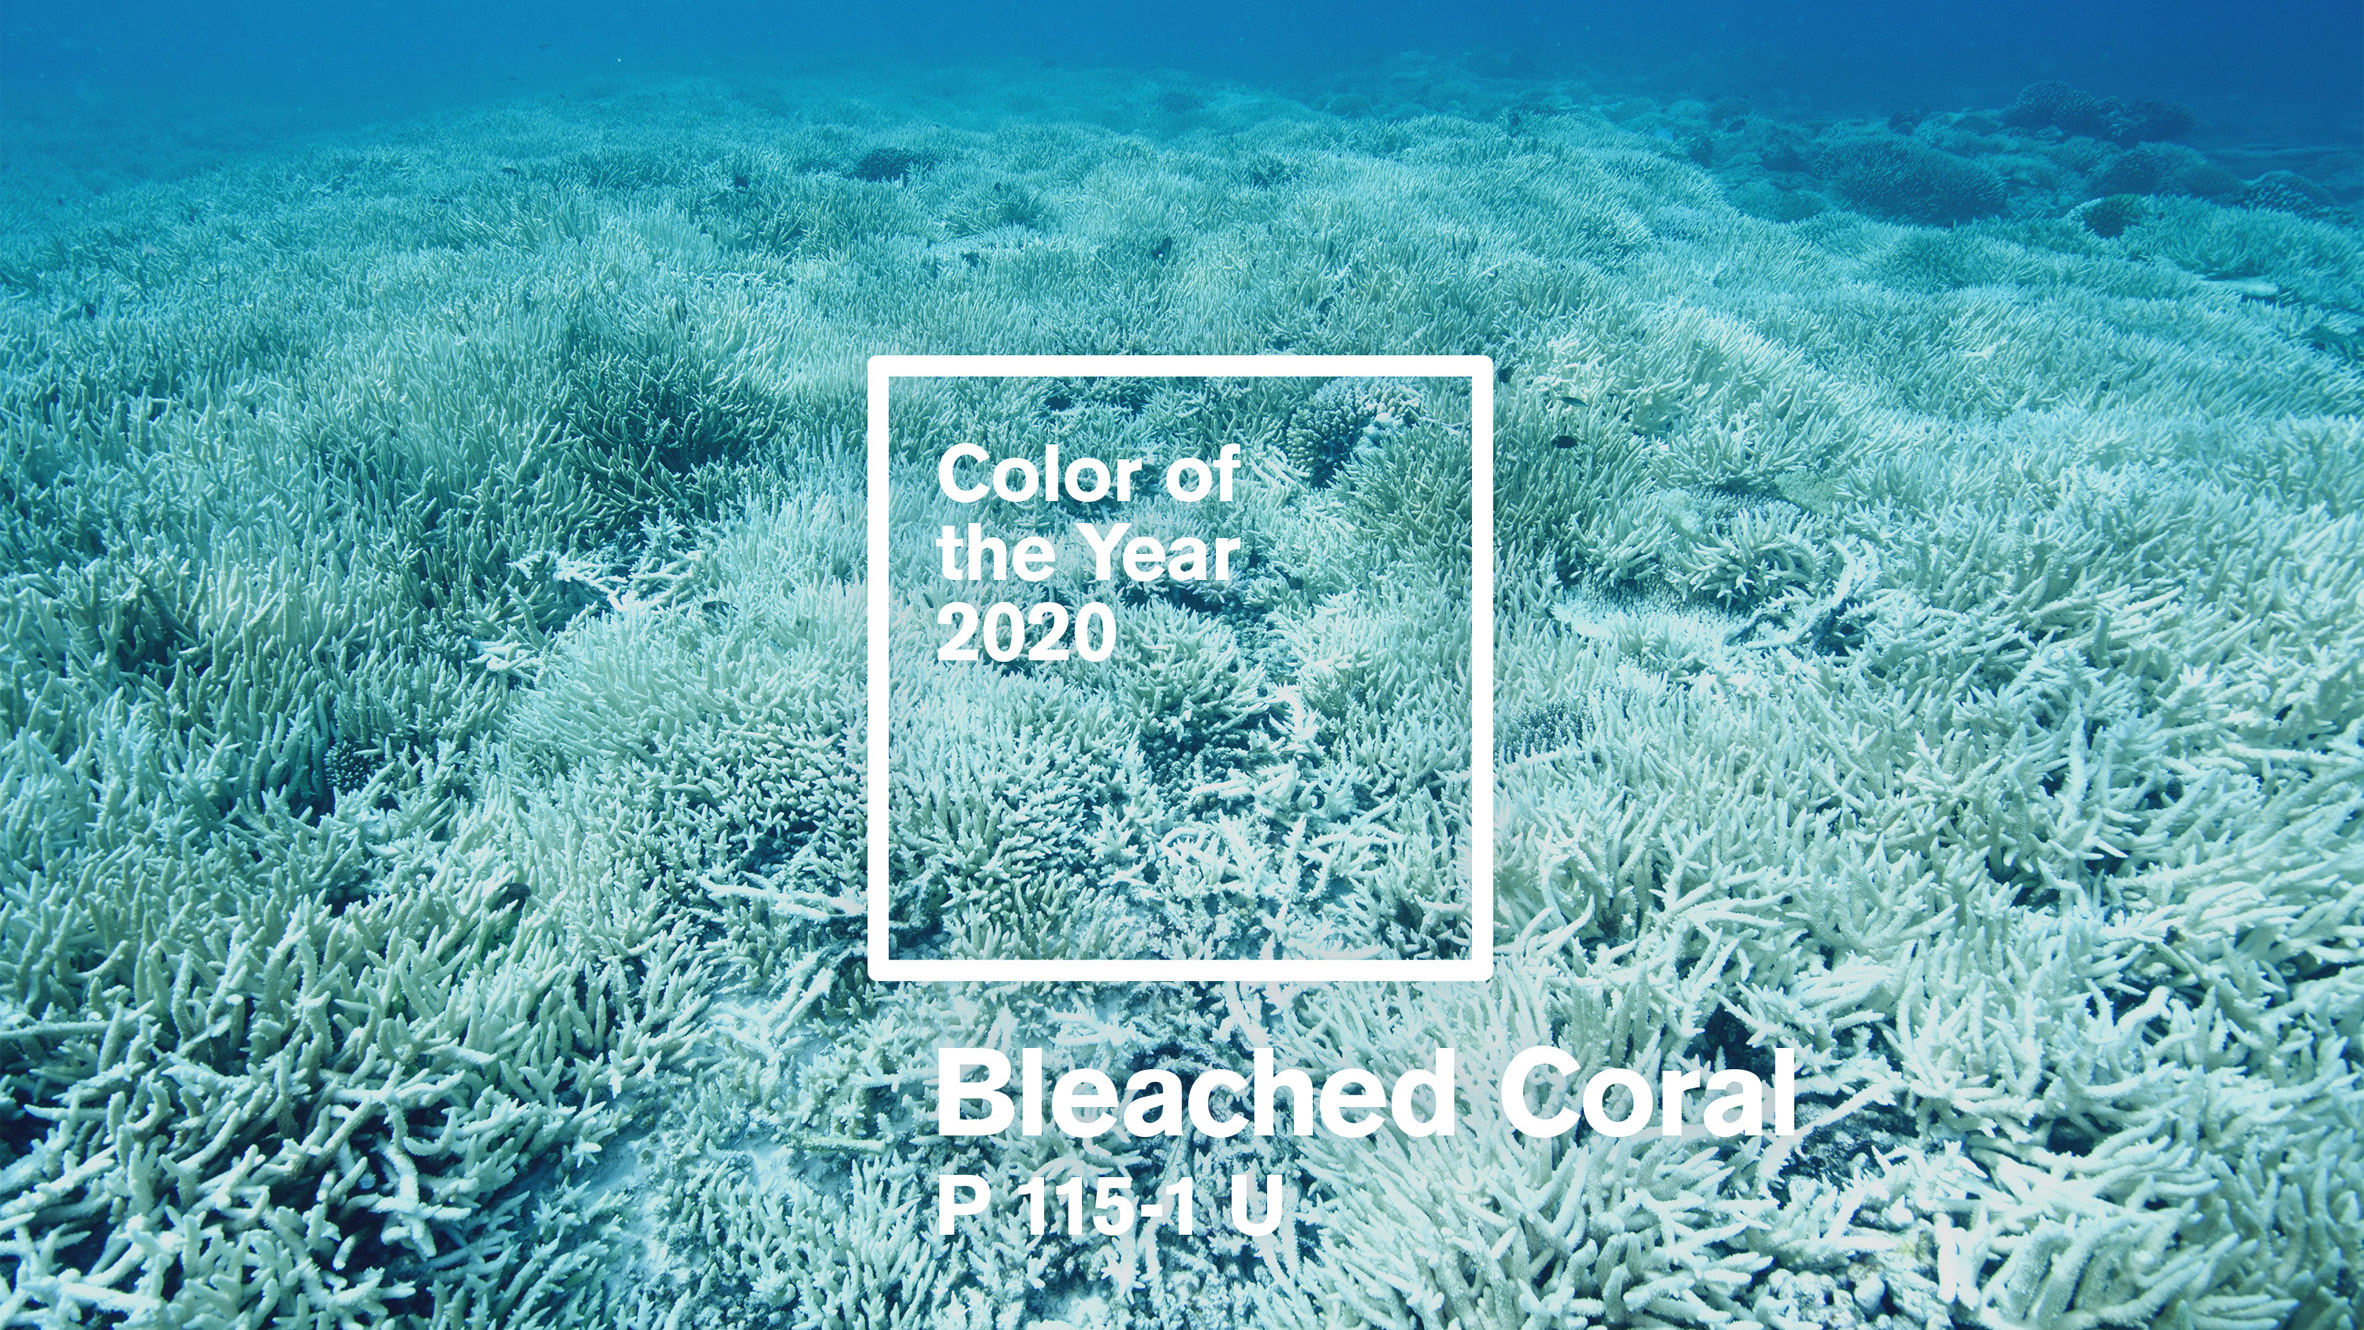 Beazley Designs of the Year 2020 nominees include Bleached Coral by Jack and Huei